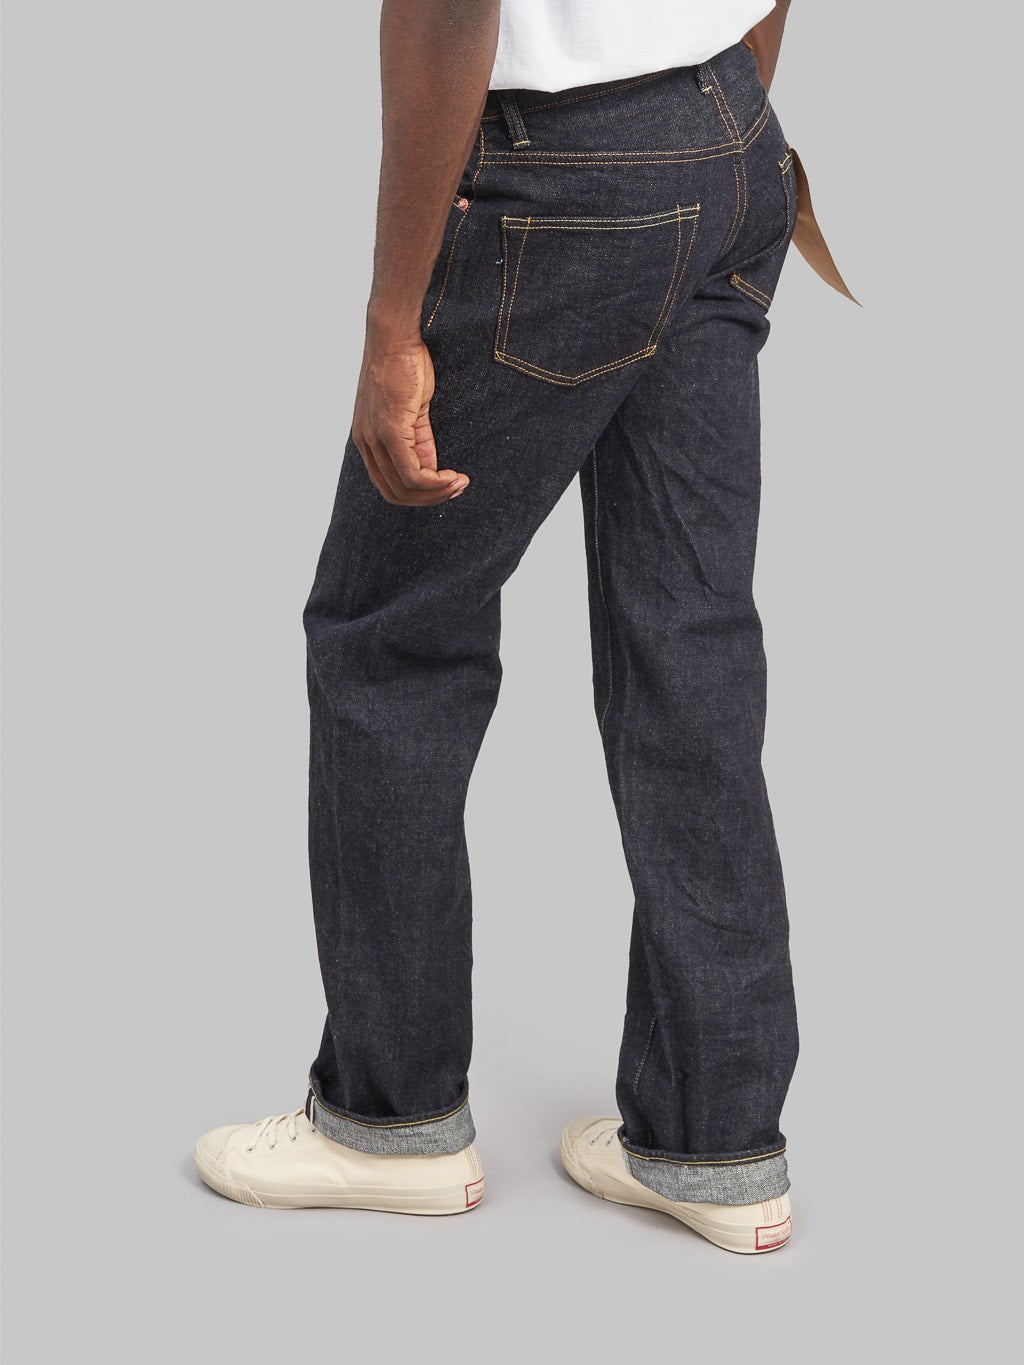 ONI Denim 200 Low Tension 15oz Wide Straight Jeans style